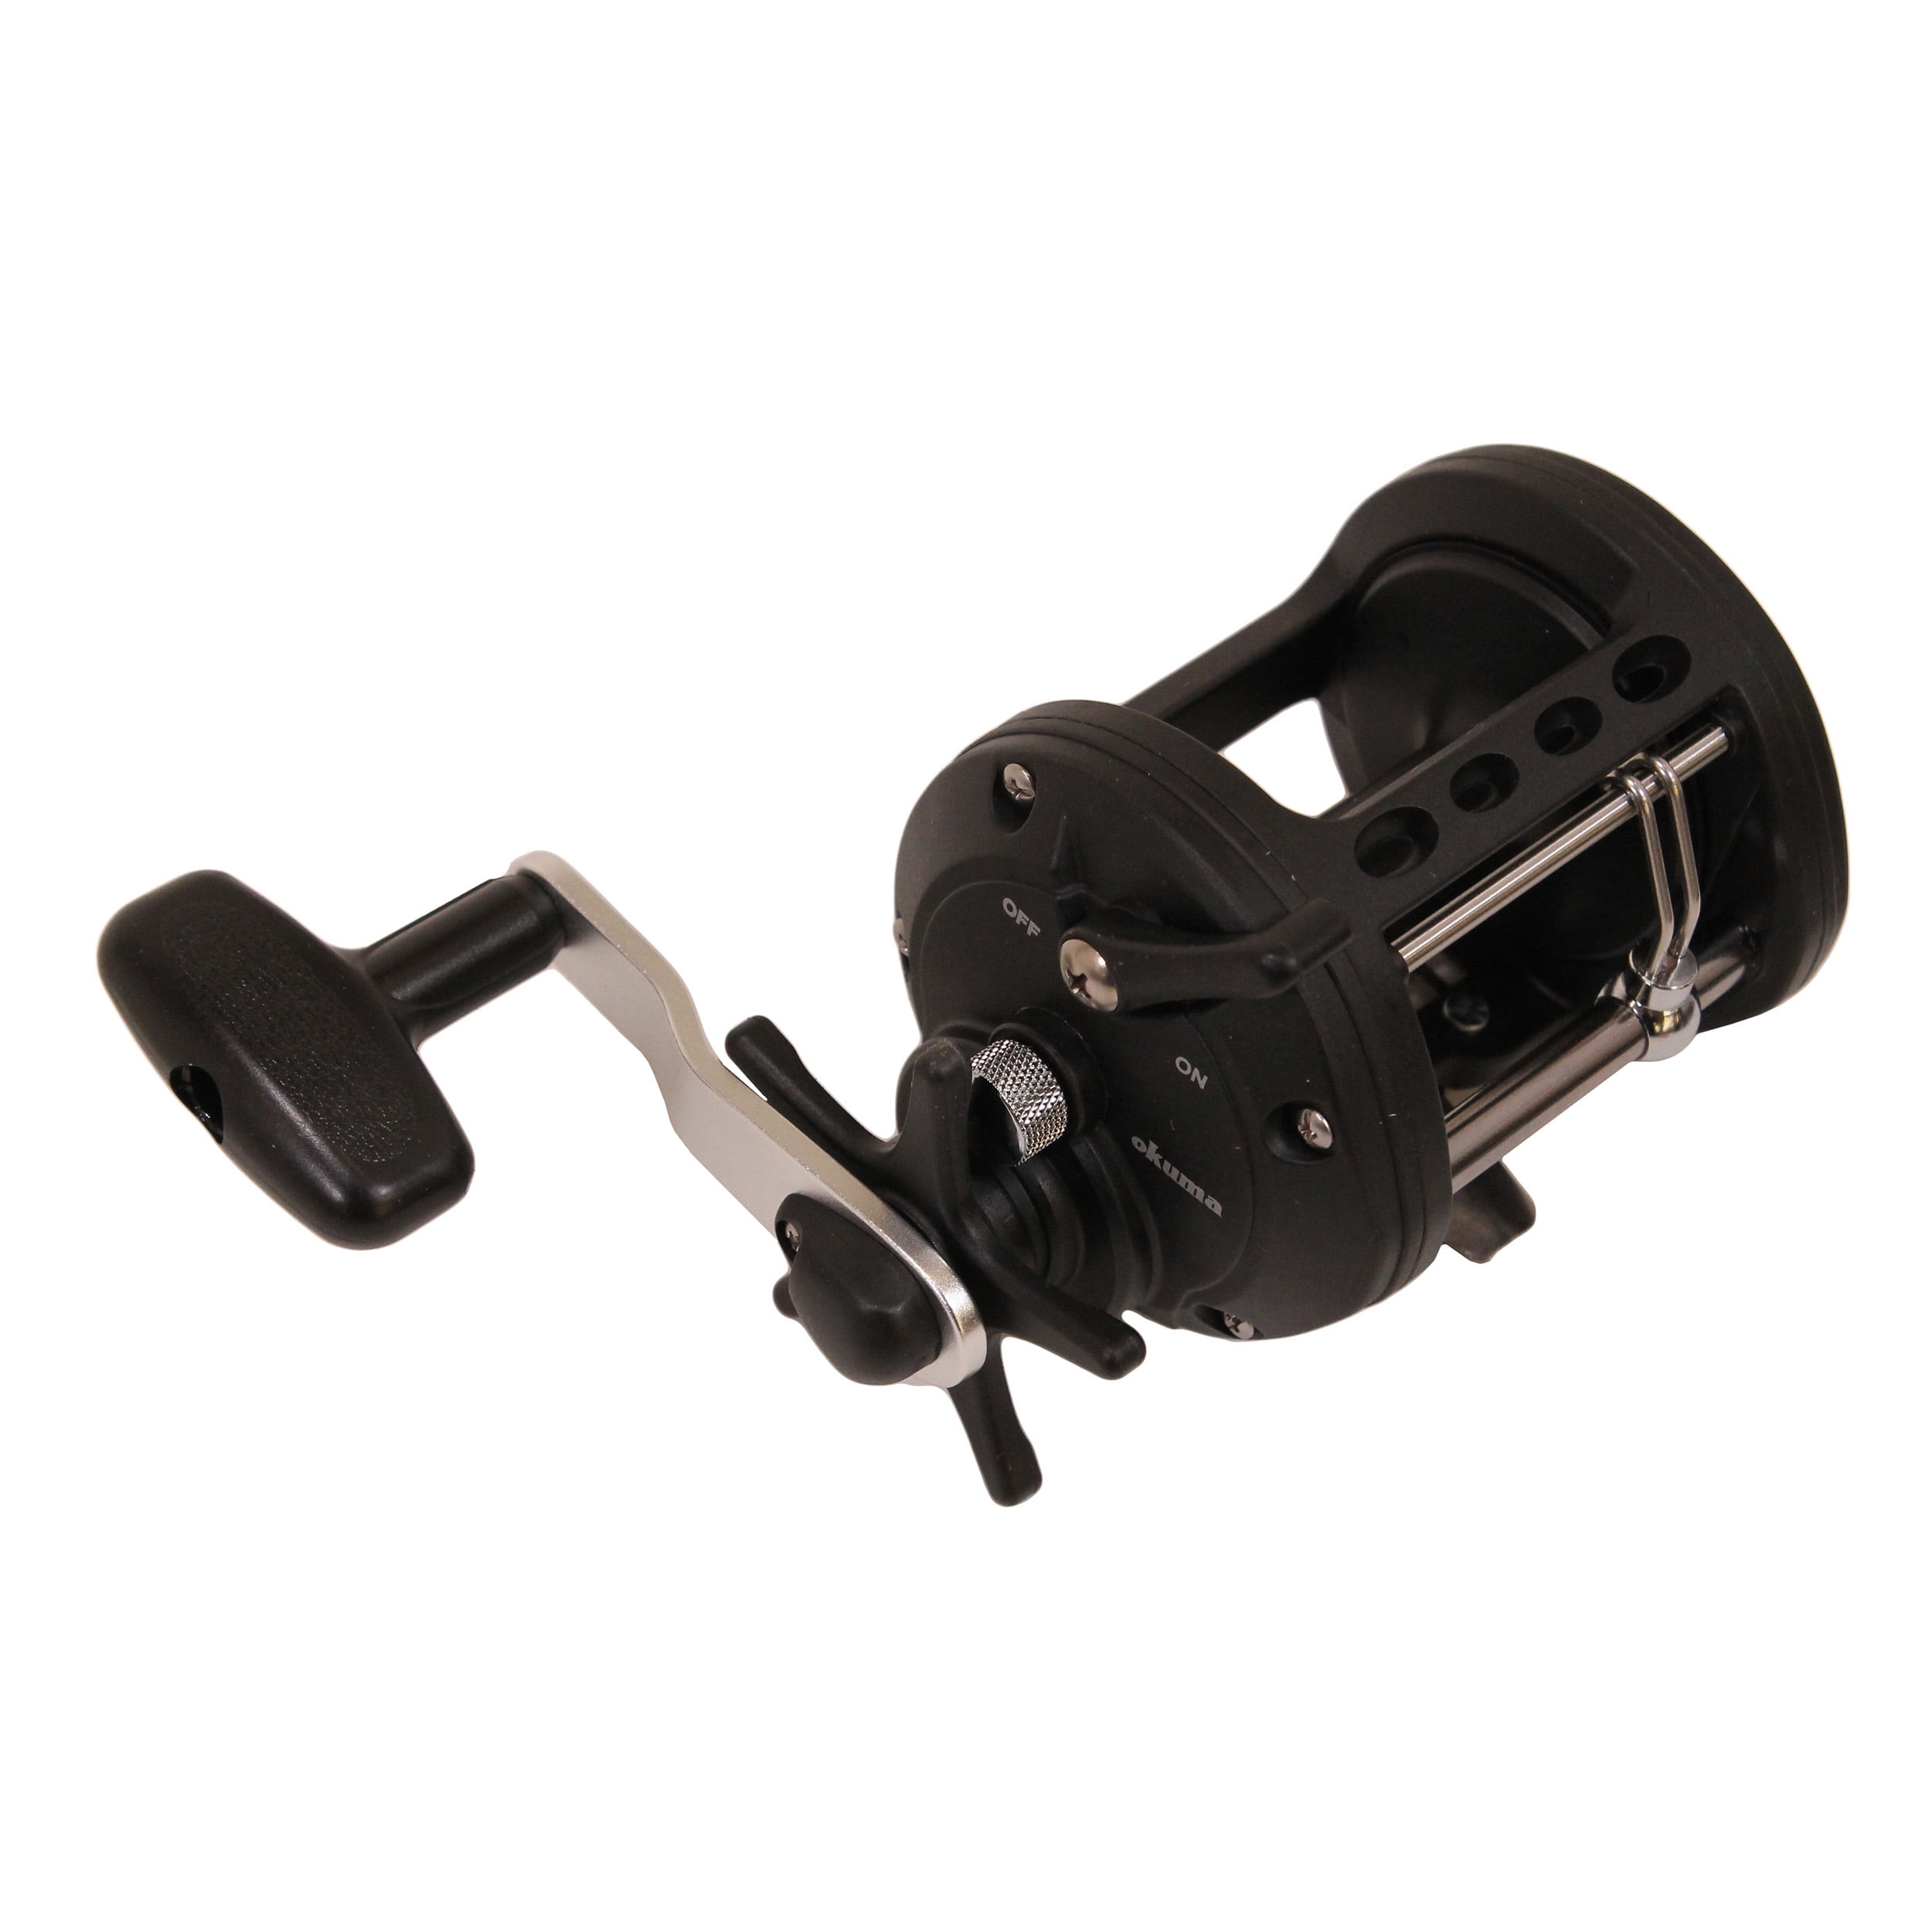 All Sizes Offered Details about   Penn Squall Level Wind Multiplier Trolling Sea Fishing Reel 